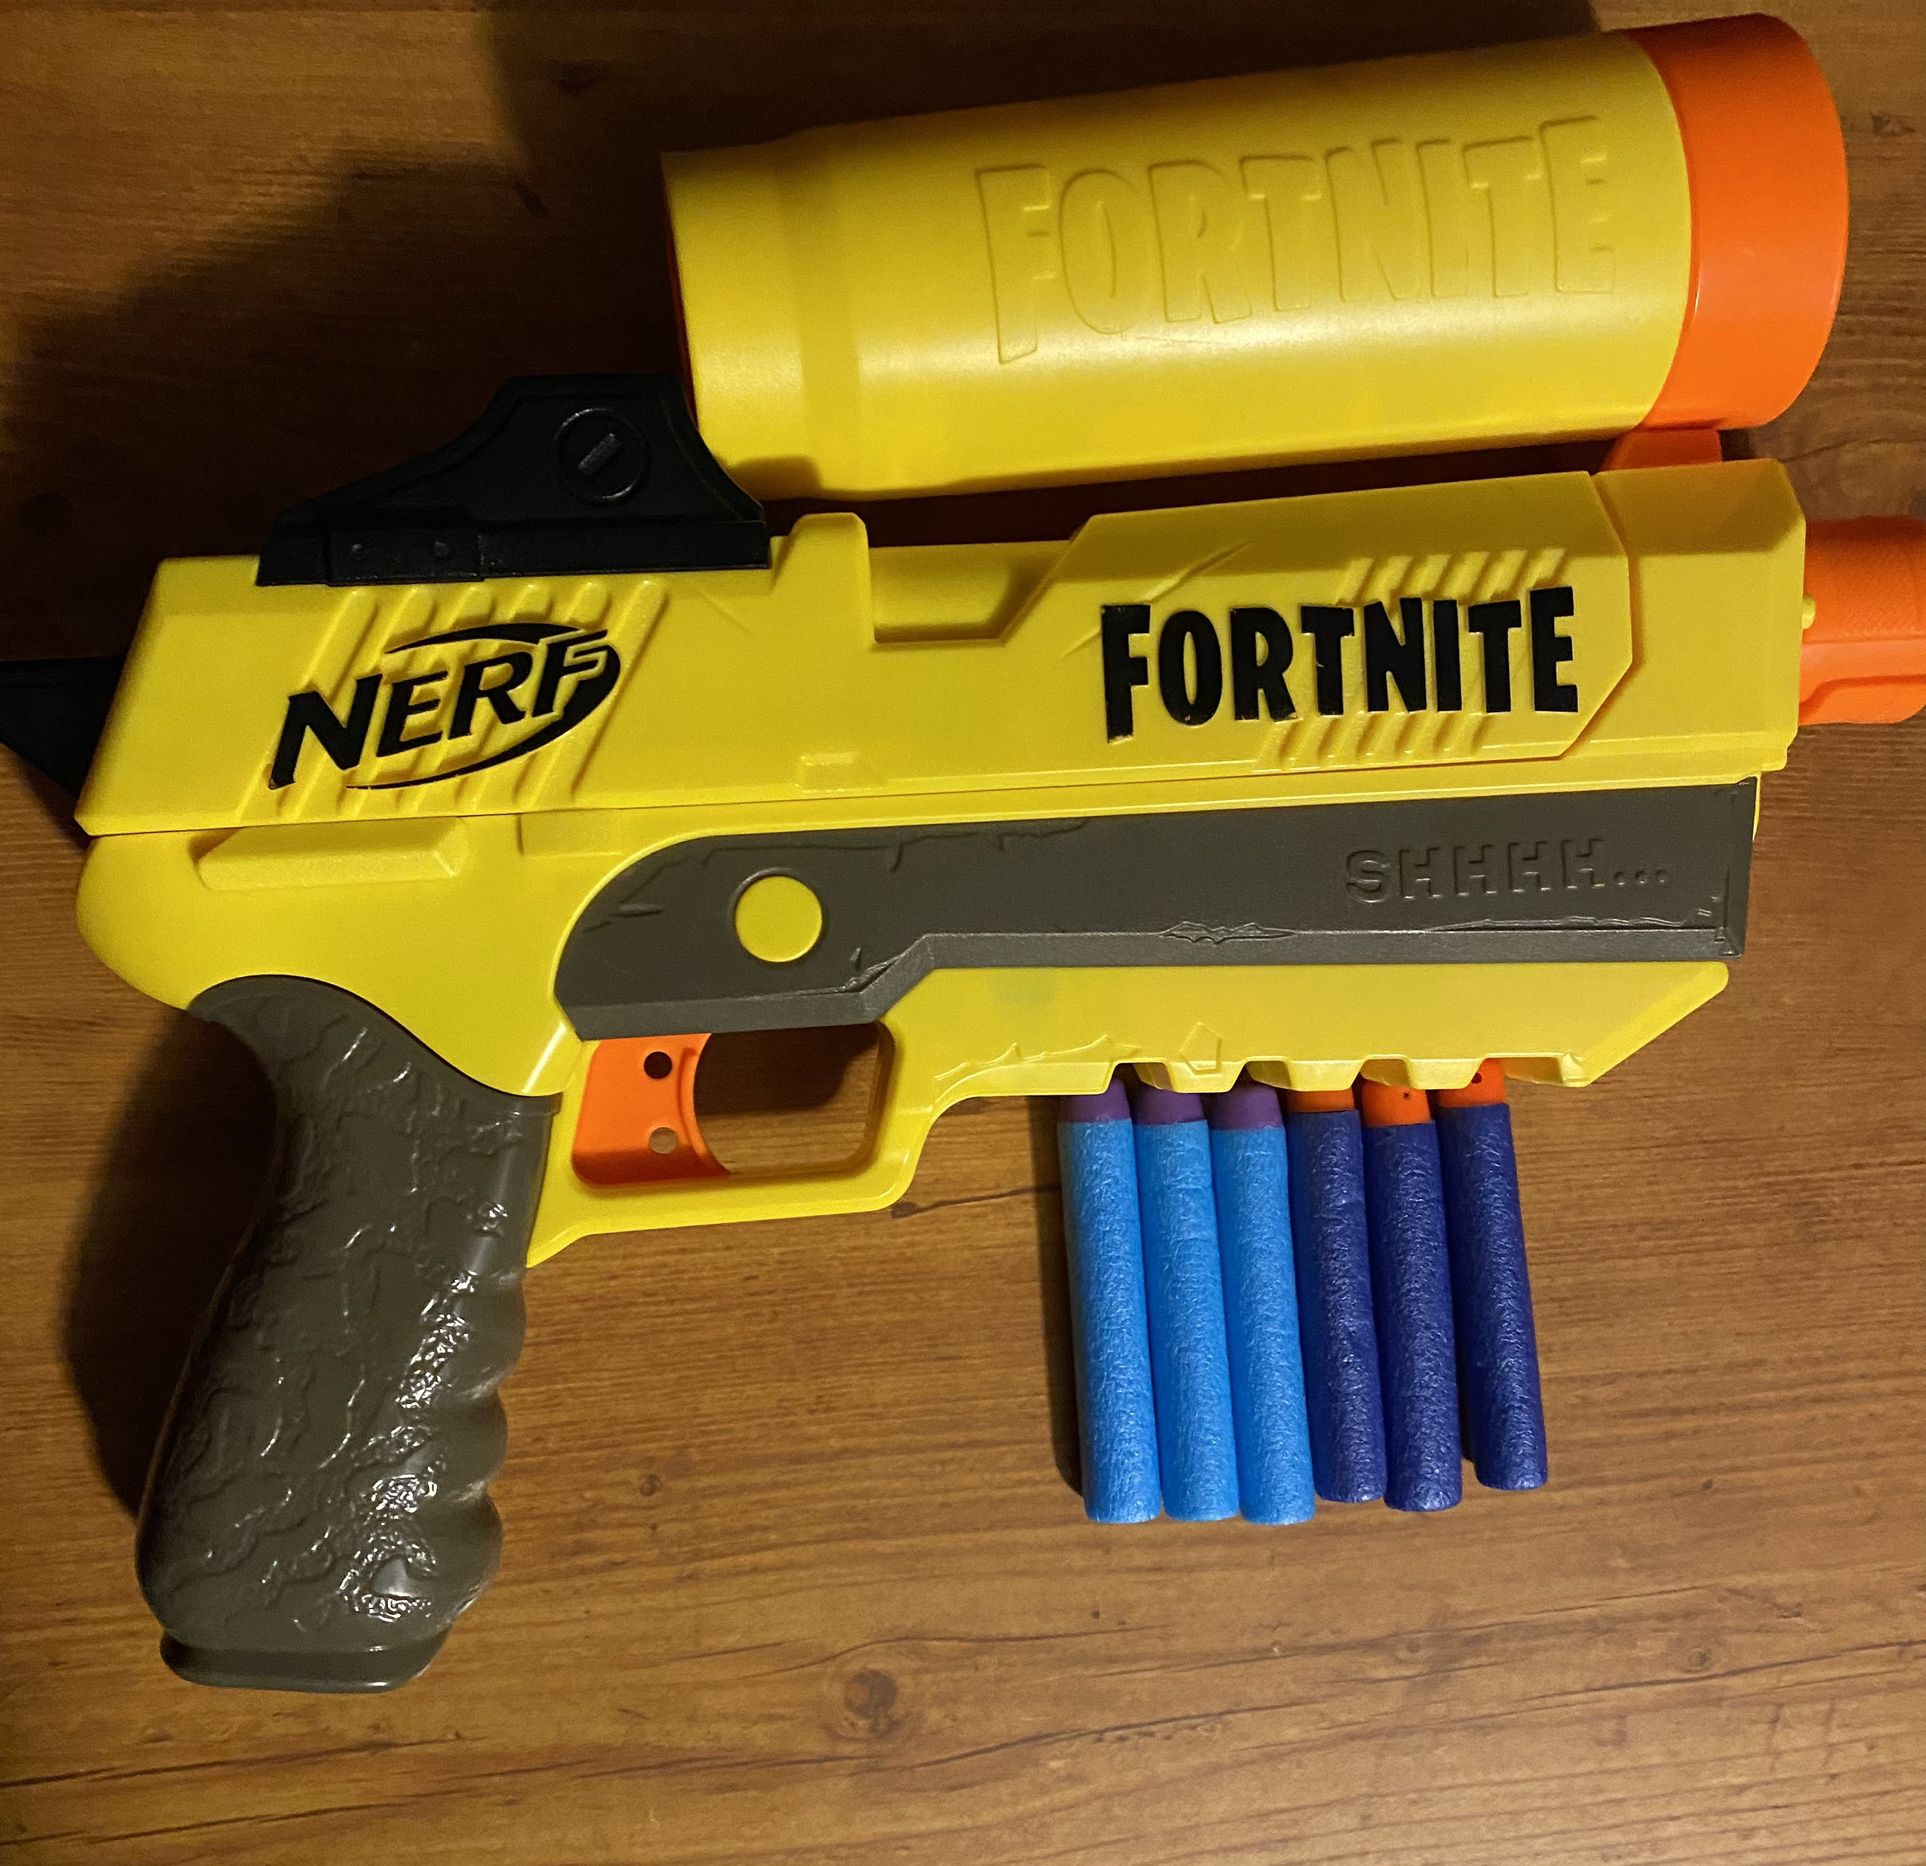 Nerf And Fortnite Crossover Silenced Pistol (With Detachable silencer)